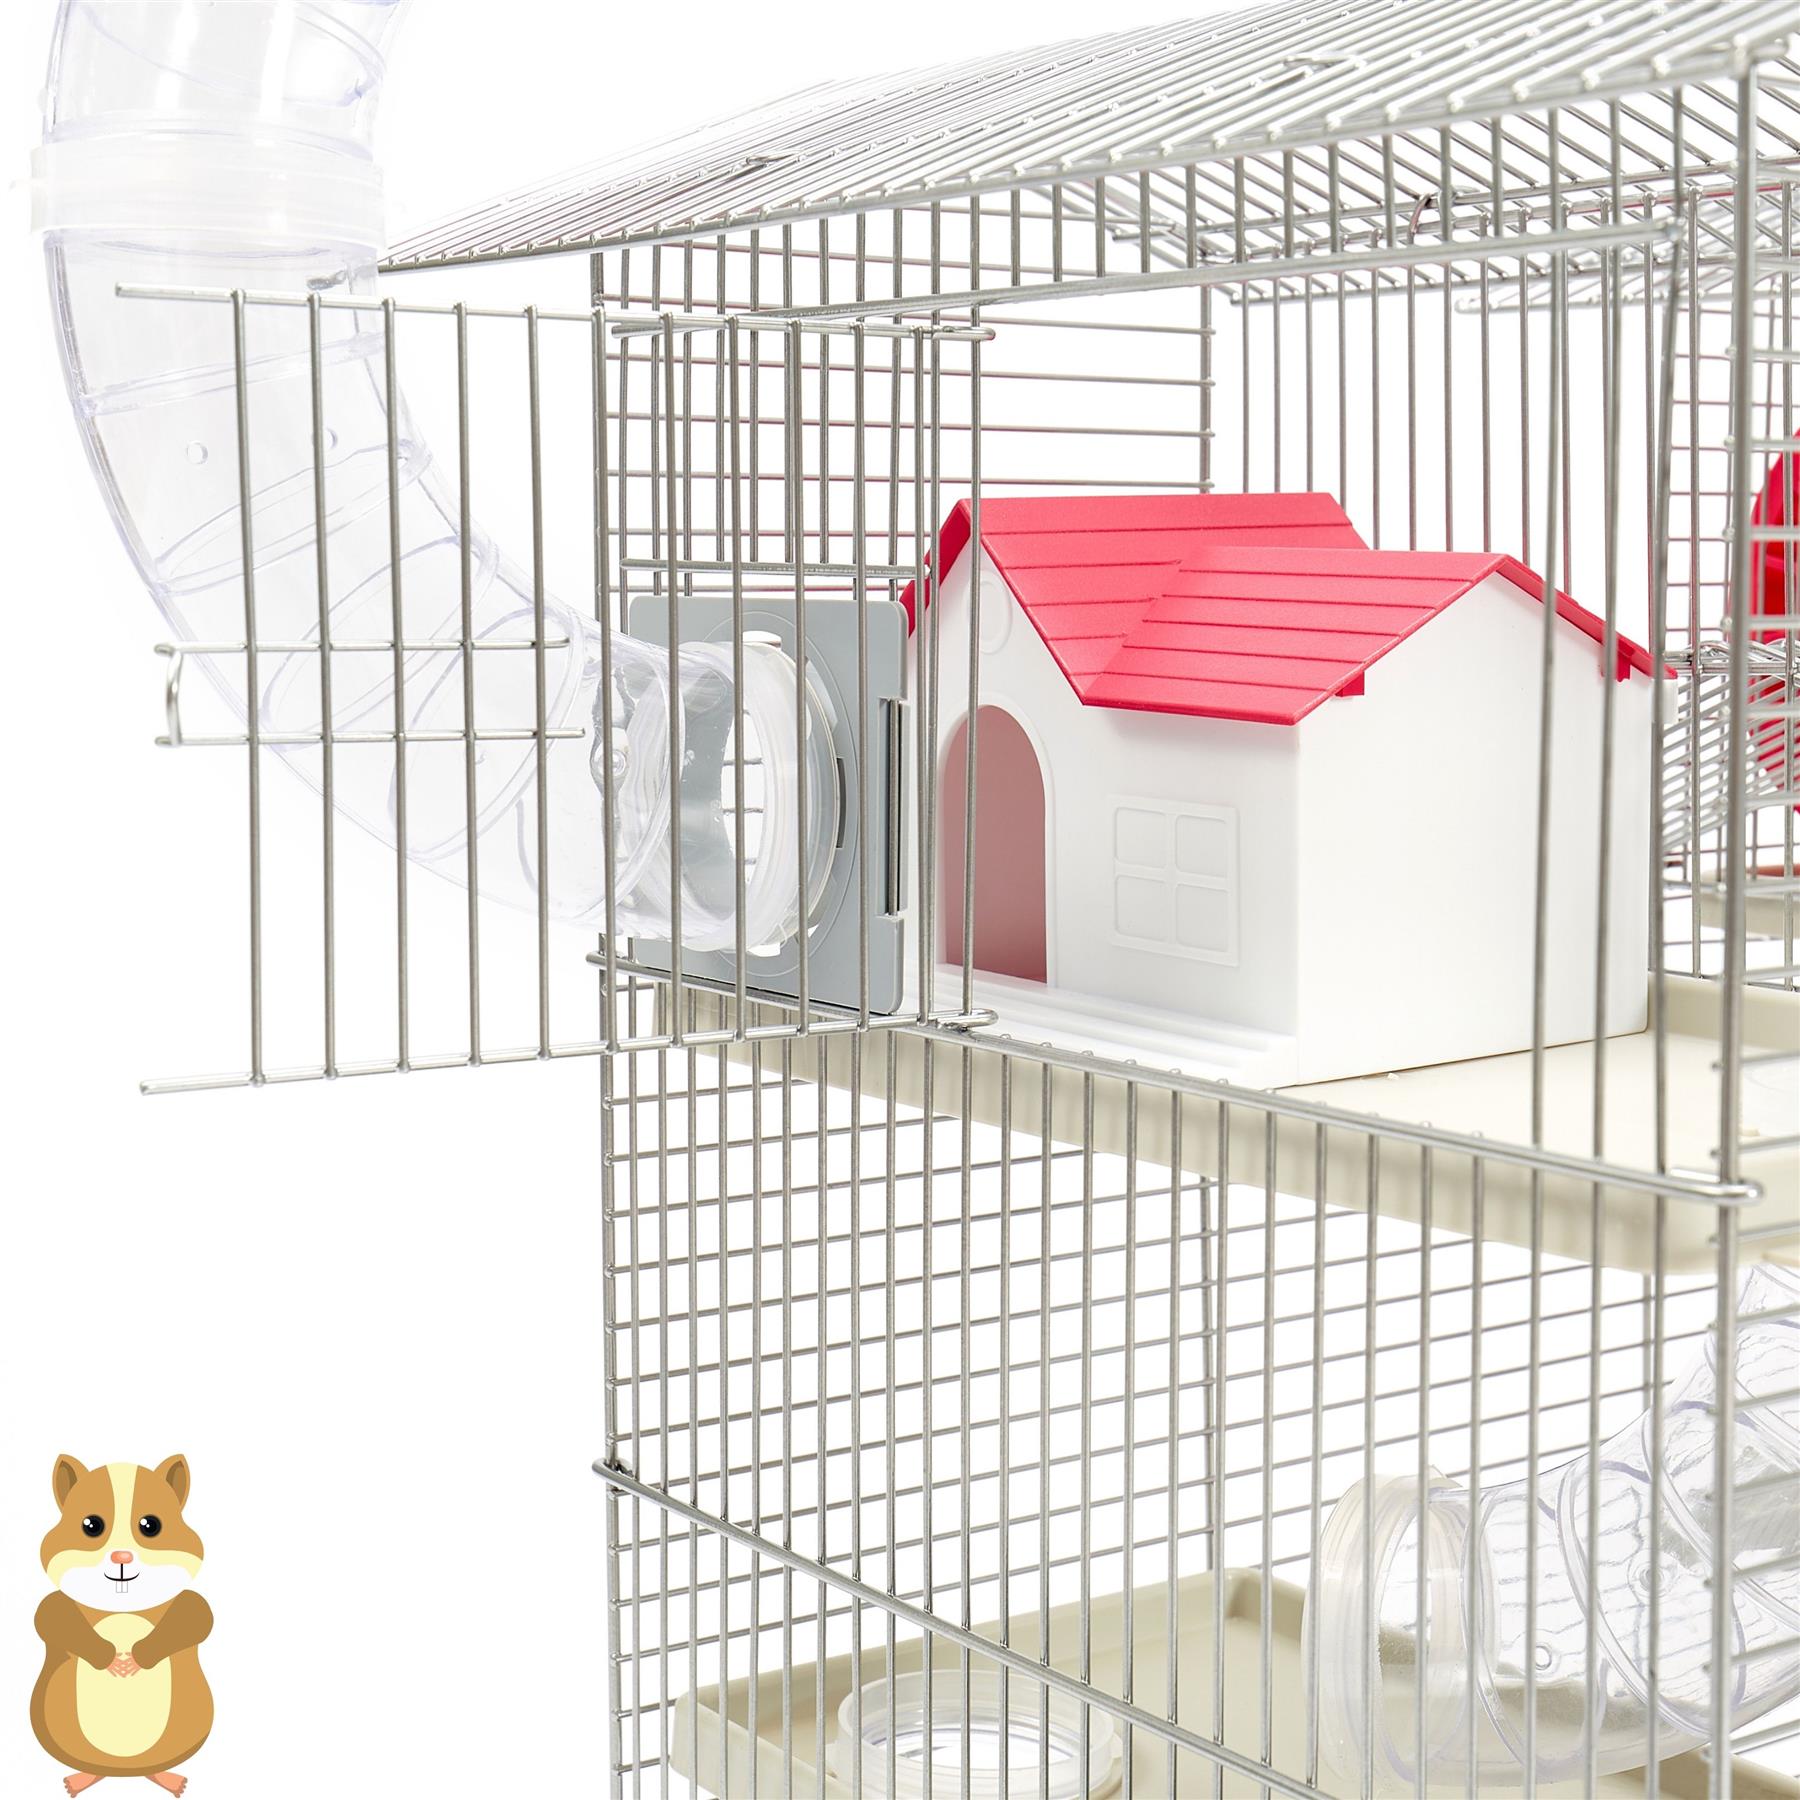 Hamster Cage w/ Wheel Pet Play Exercise 3 Tiers Mouse Rodents For Small Animals